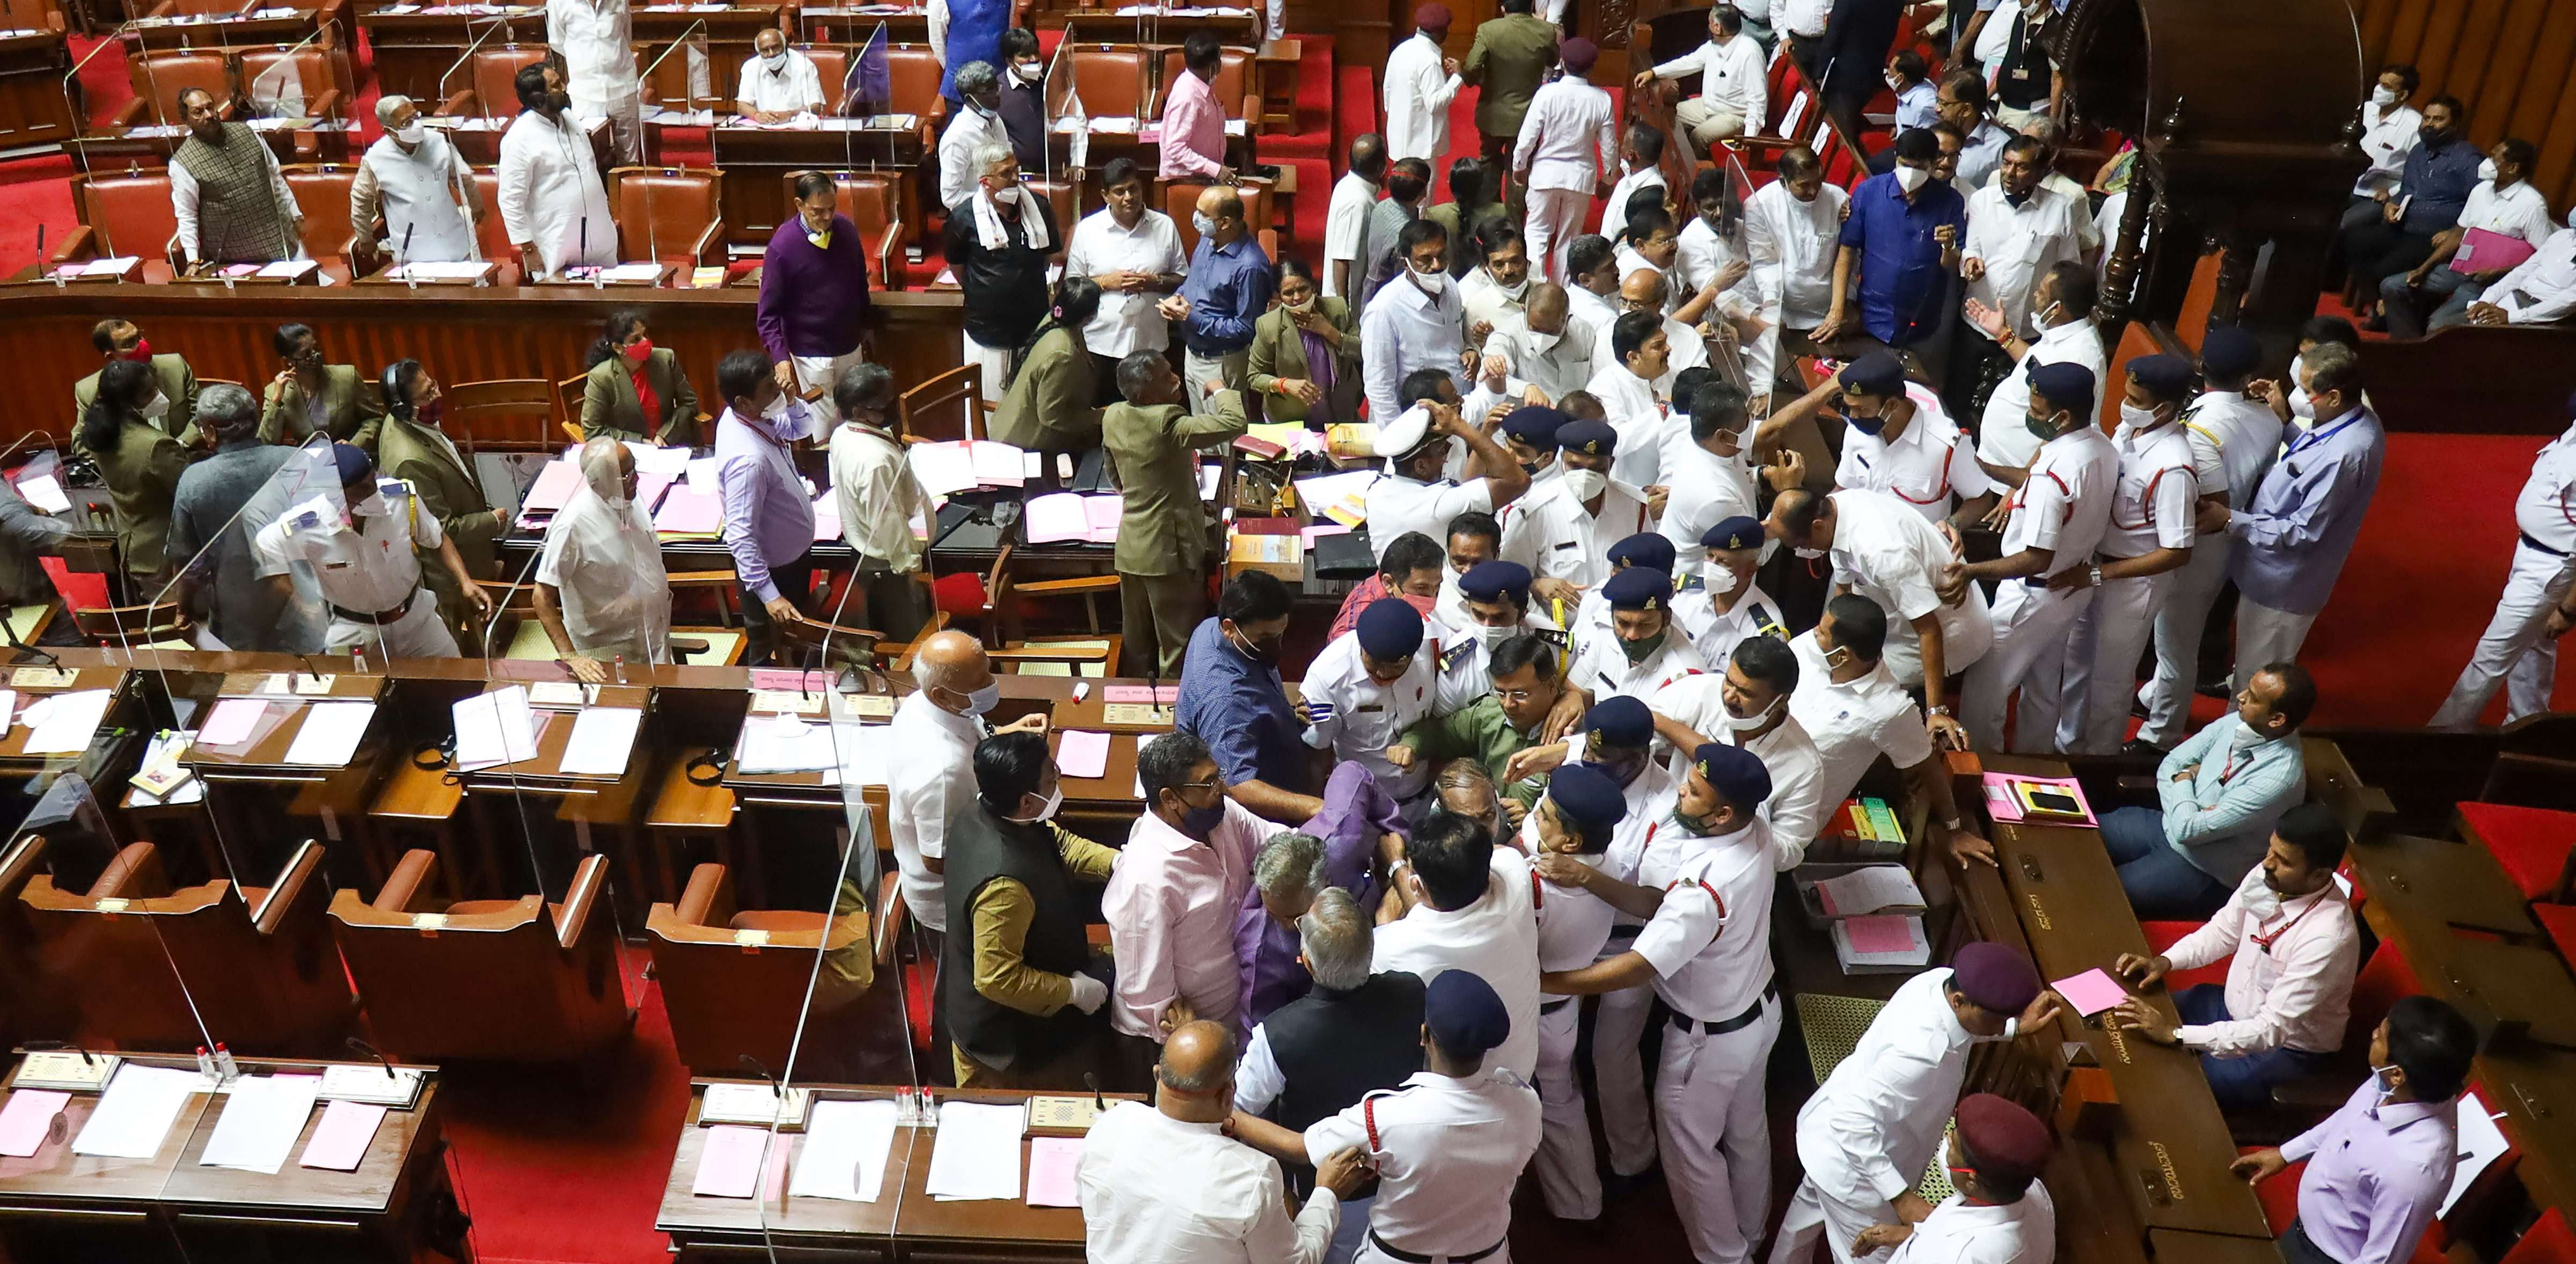 Security personnel attempt to stop ruckus between BJP and Congress leaders, which broke out over the chairman post, during the Karnataka Legislative Council in Bengaluru. Credit: PTI